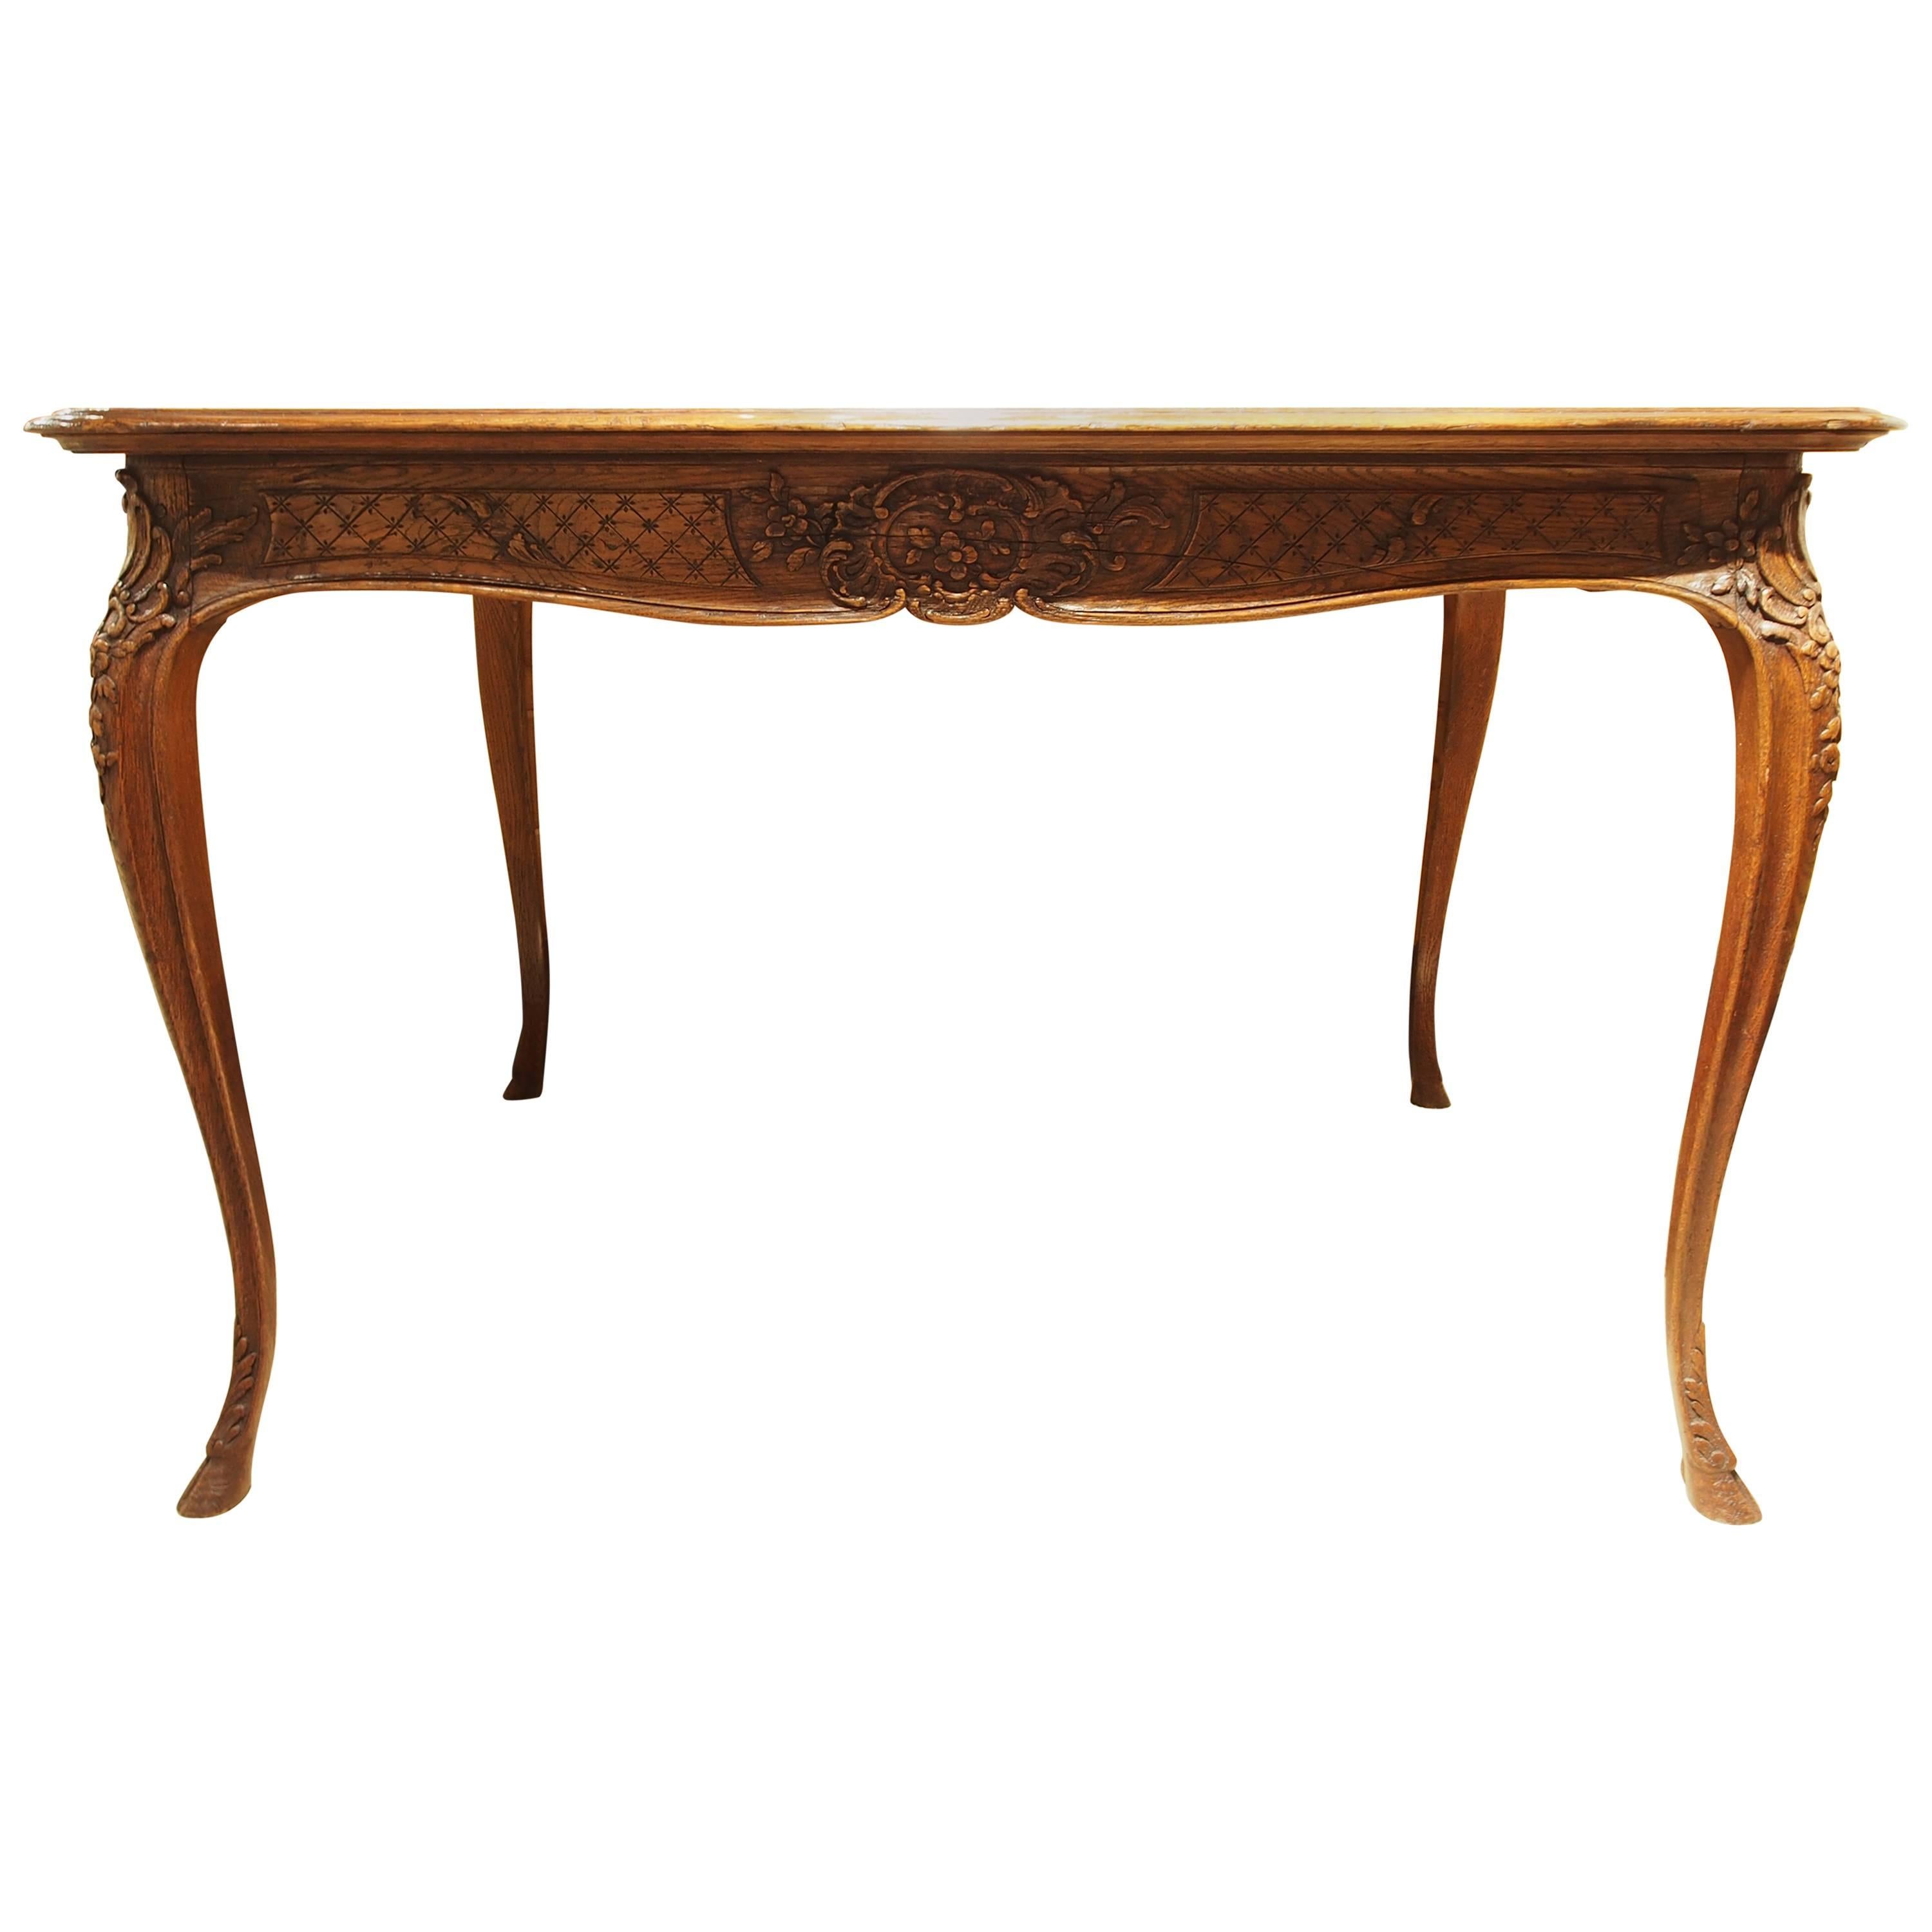 French Oak Table, circa 1900 with Ornate Carved Apron and Curved Legs For Sale